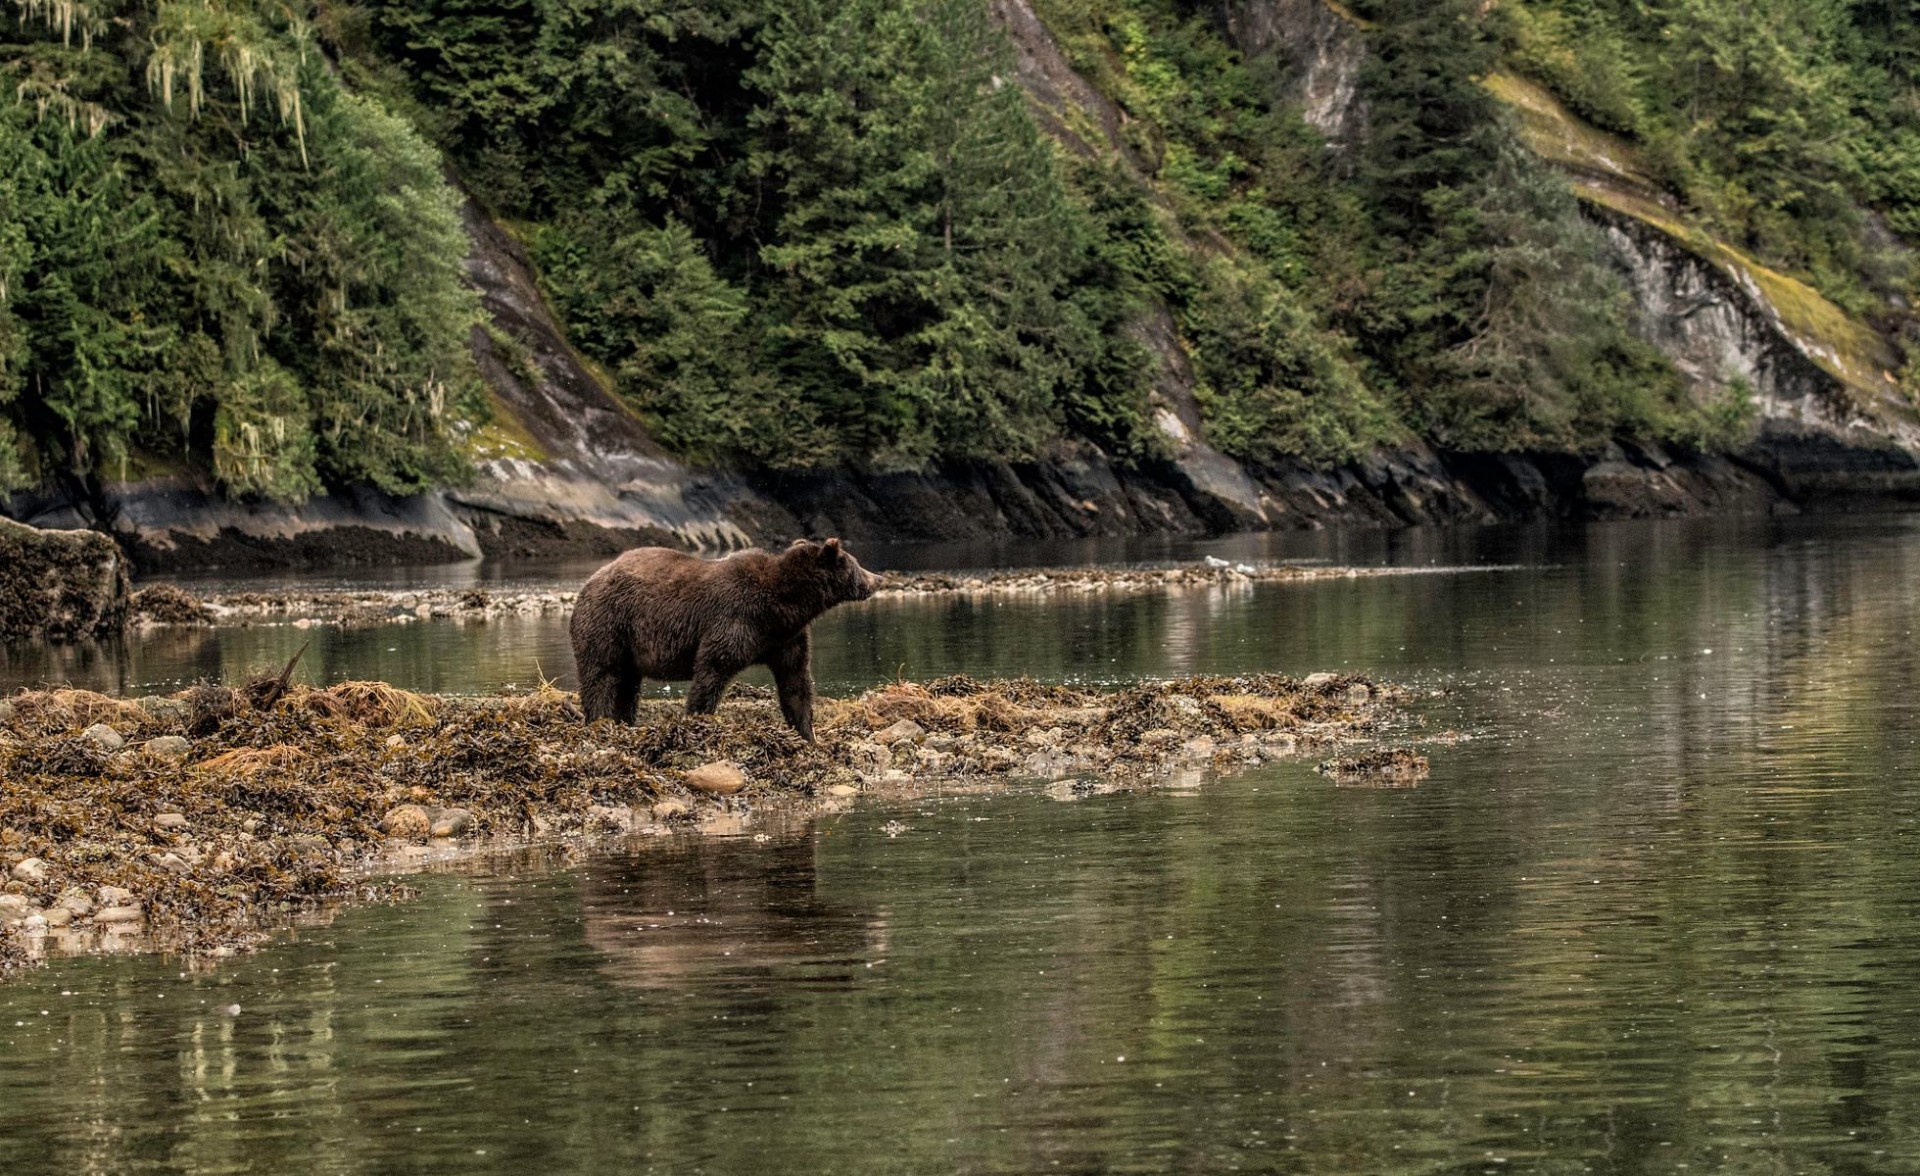 Grizzly bear standing at water